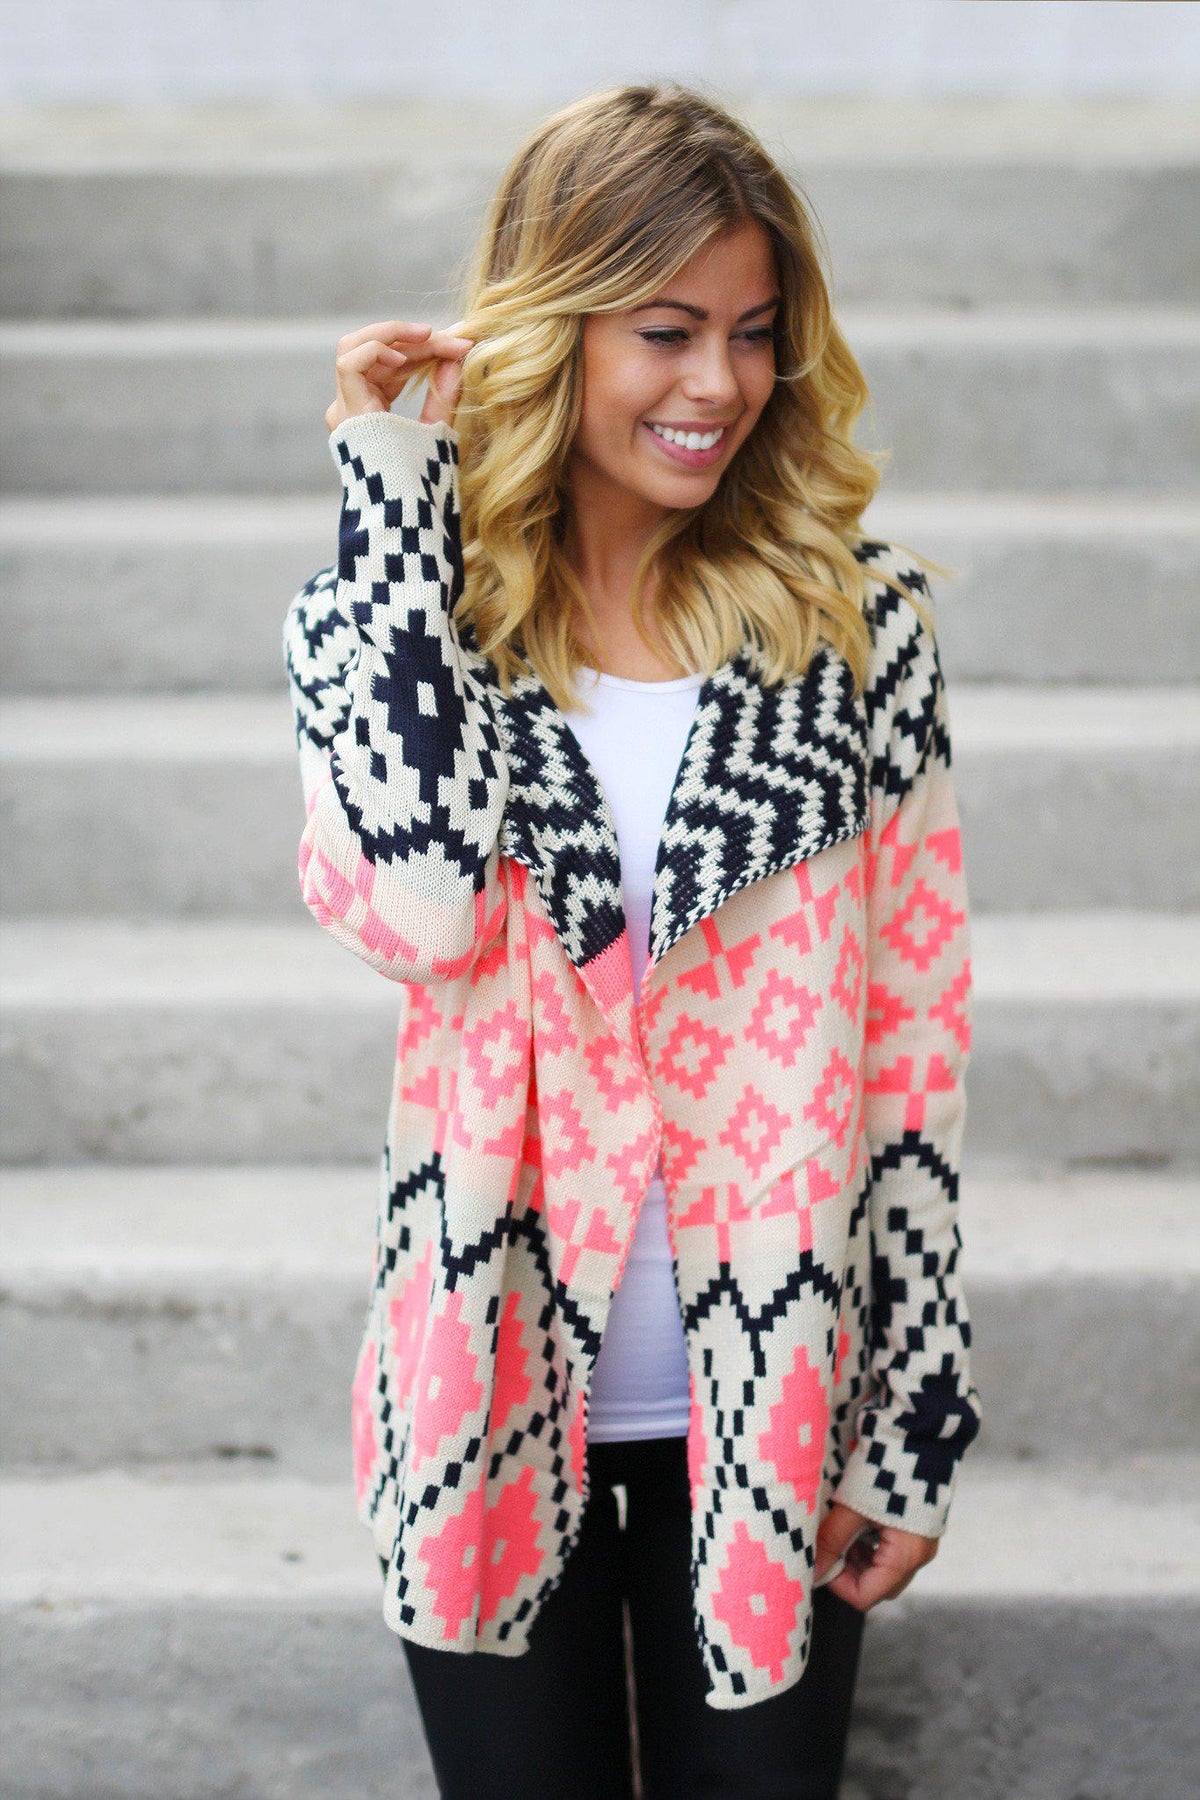 Neon Pink and Navy Printed Cardigan | Neon Pink Cardi – Saved by the Dress